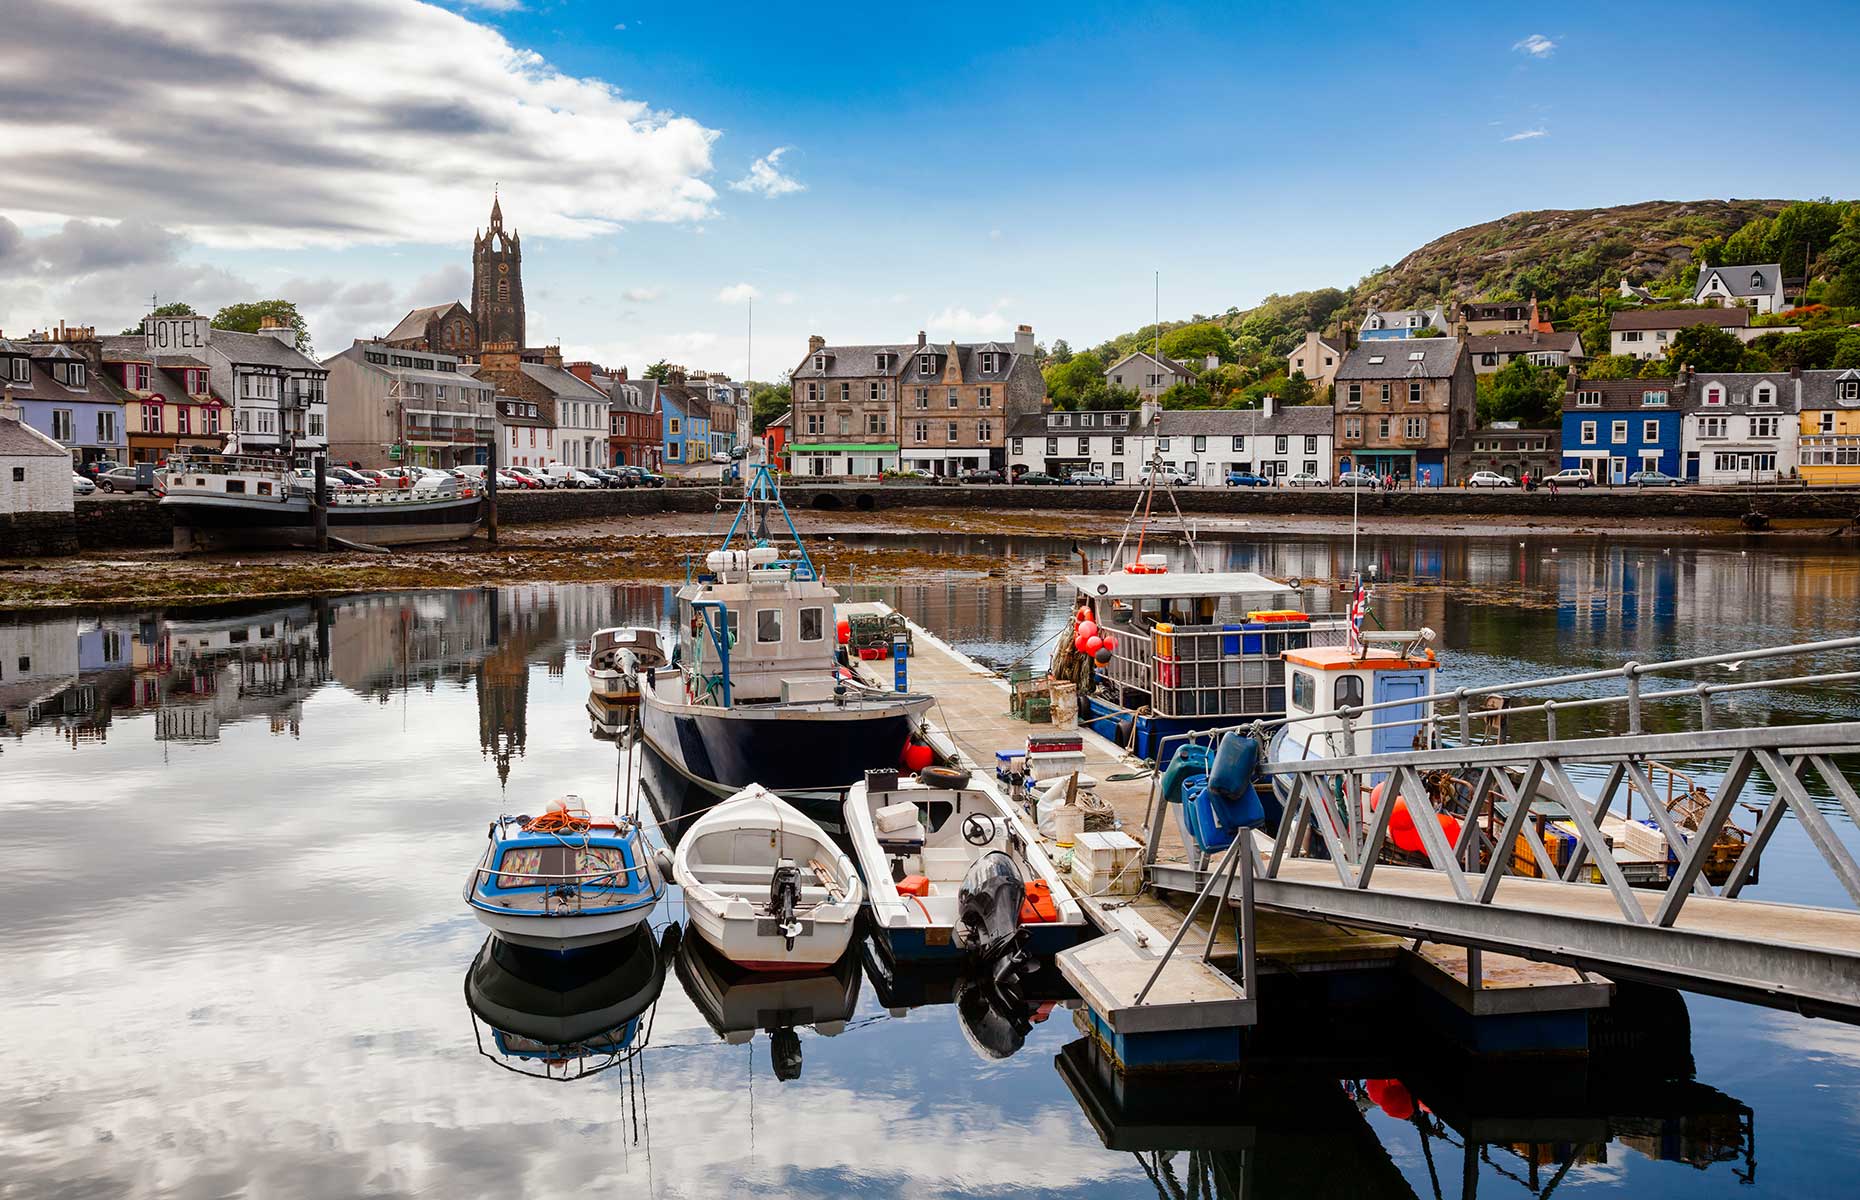 Tarbet village Scotland on a sunny day with boats in the foreground (Image: Dmitry Naumov/Shutterstock)